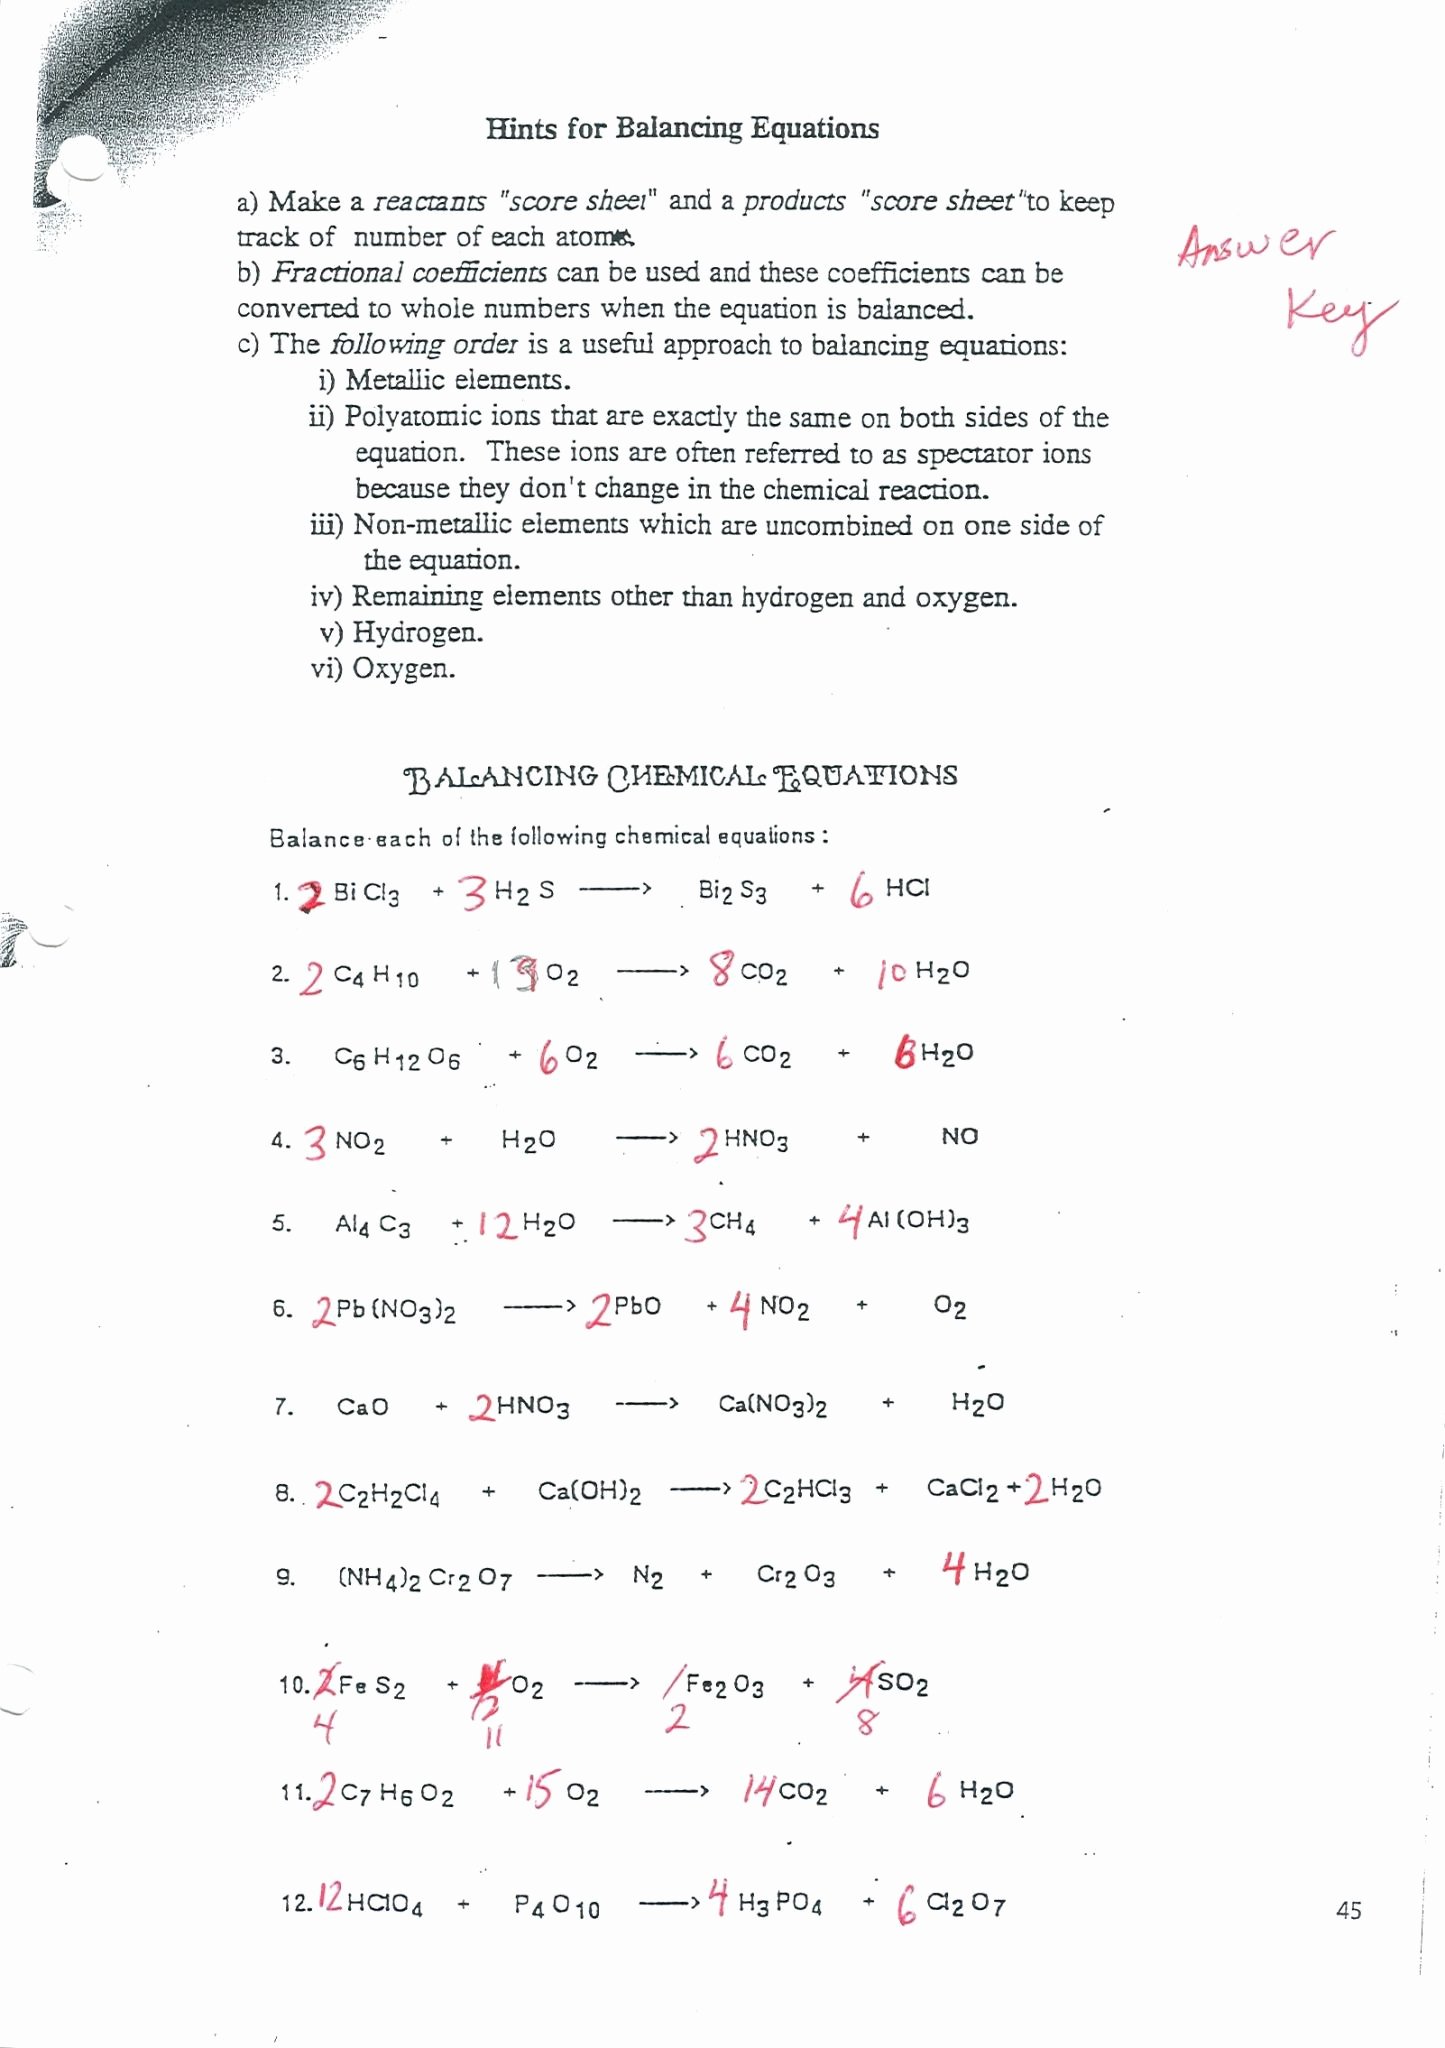 50 Balancing Equations Worksheet Answer Key Chessmuseum Template Library